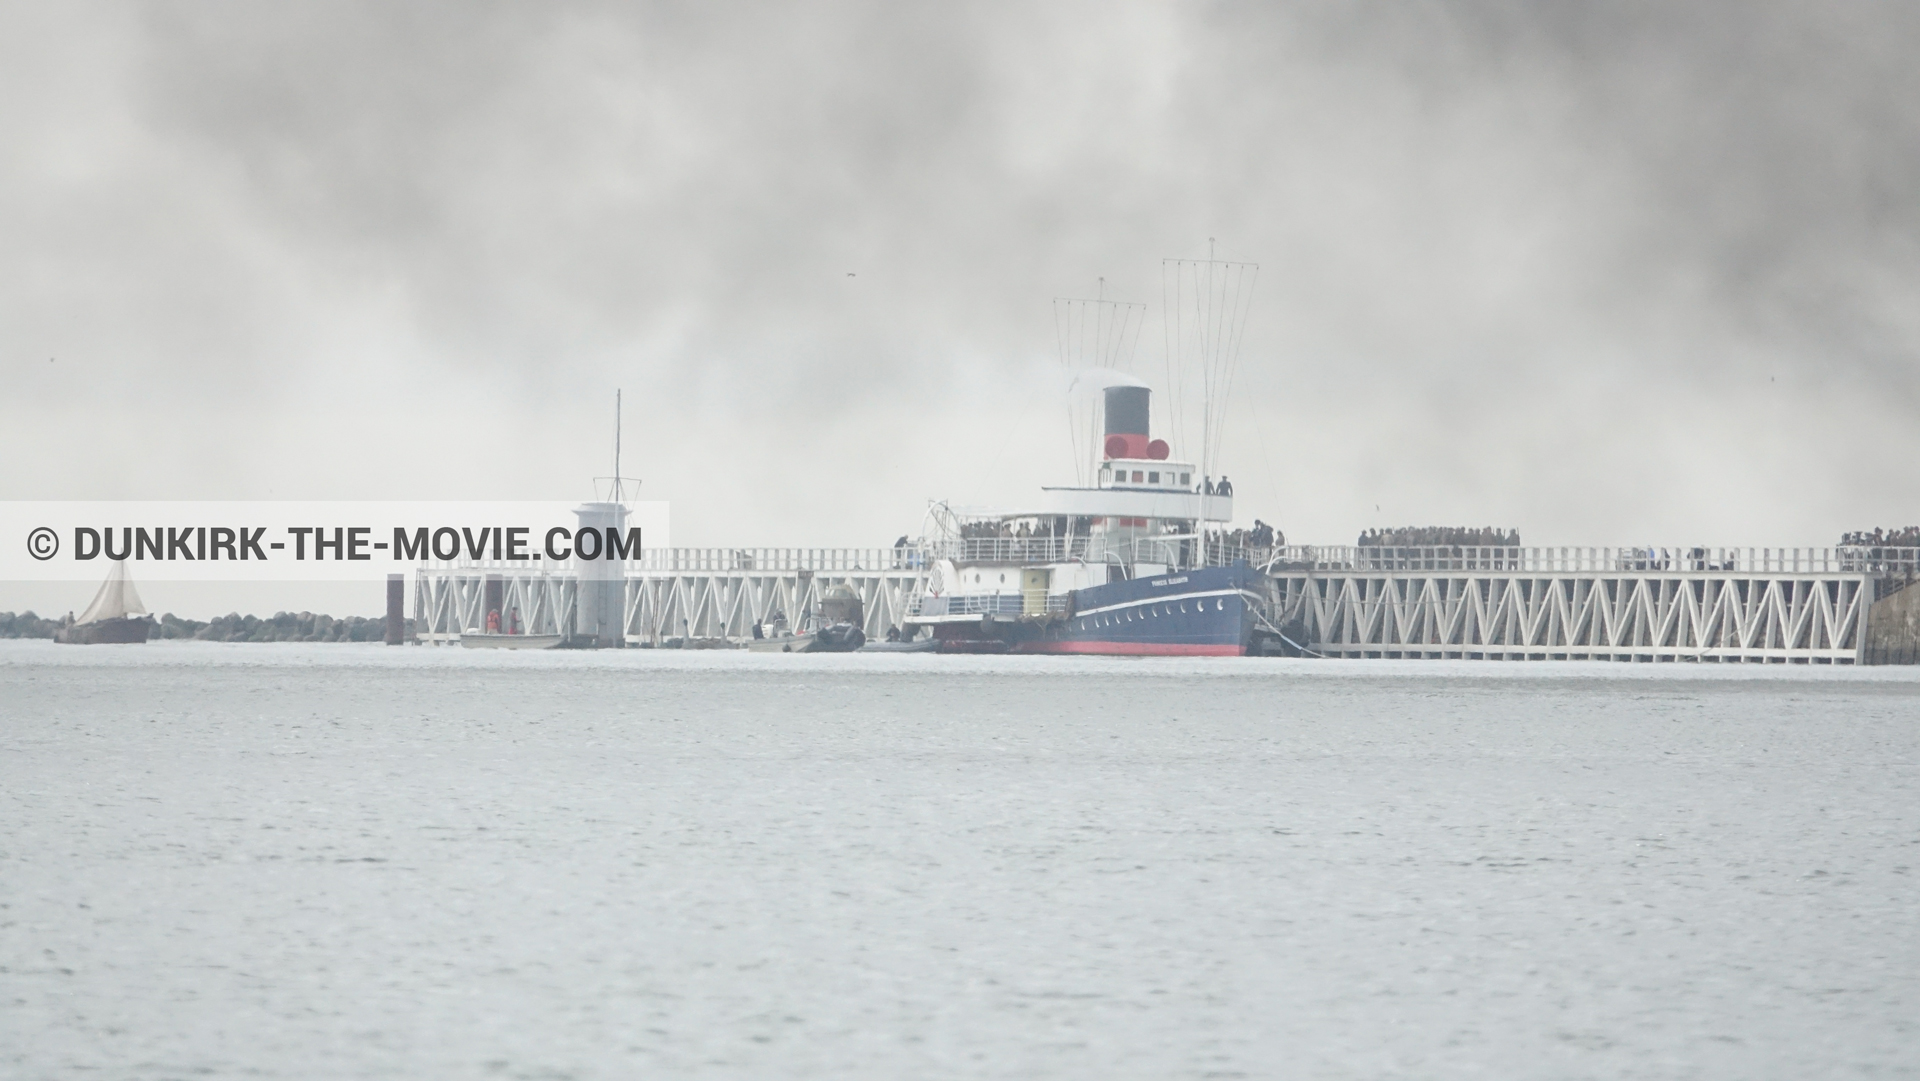 Picture with grey sky, decor, supernumeraries, black smoke, EST pier, calm sea, Princess Elizabeth,  from behind the scene of the Dunkirk movie by Nolan